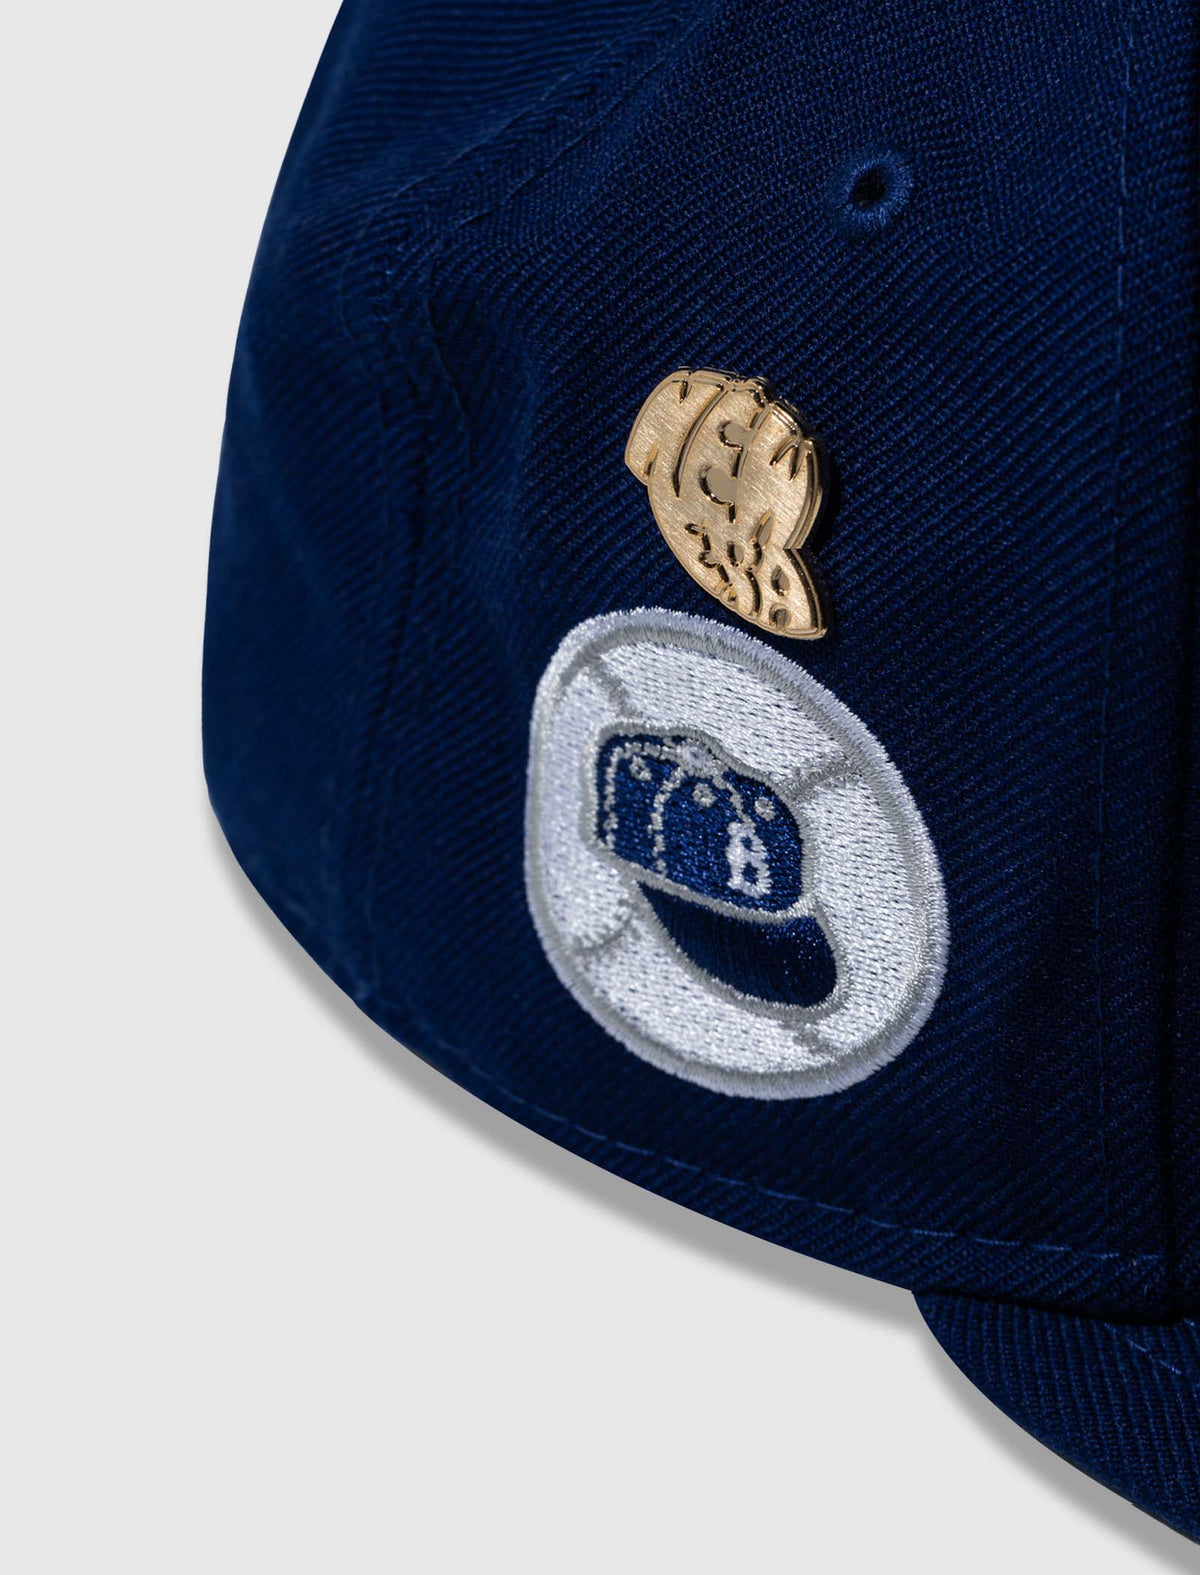 Photos of my Dodgers hat, Rams hat and new Rams hat. : r